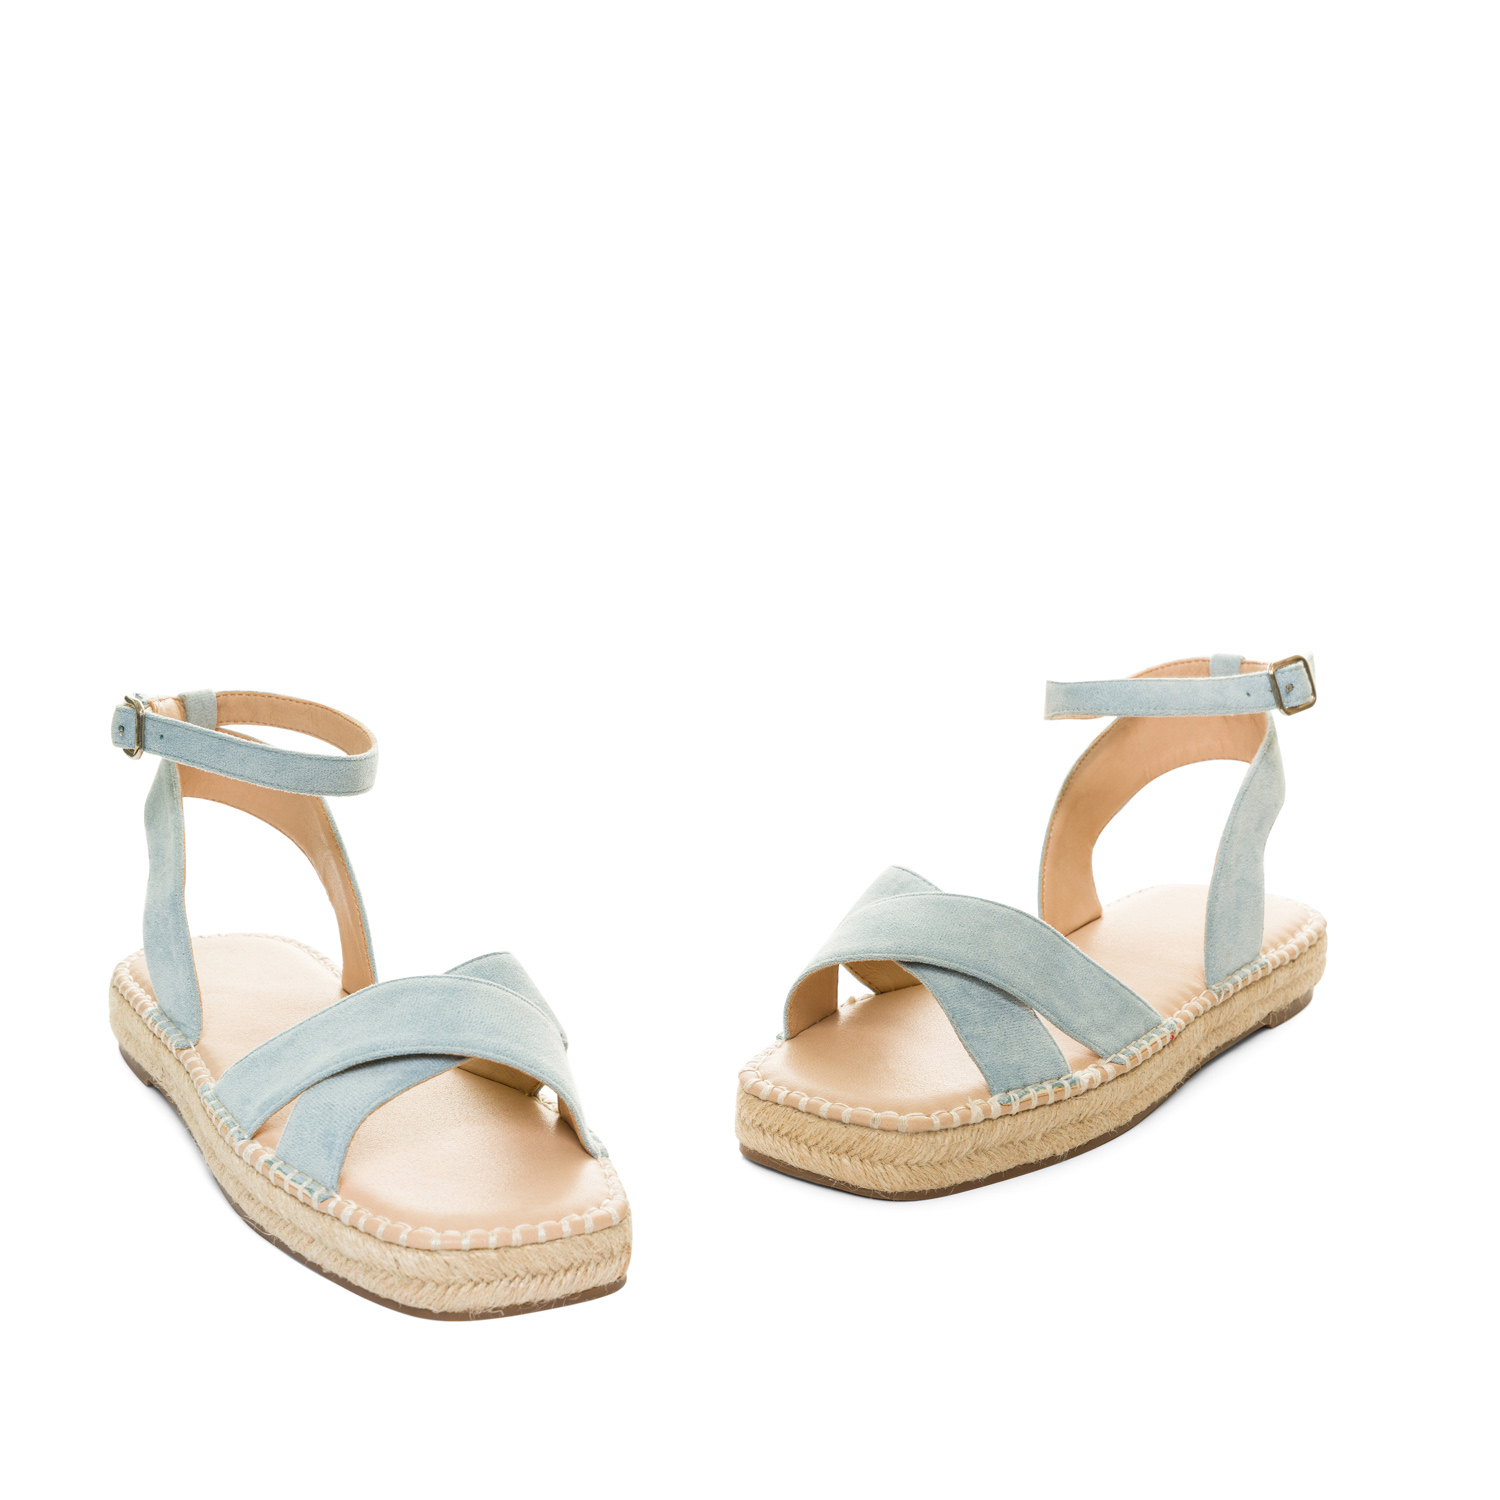 Light blue faux suede sandals with jute wedge 